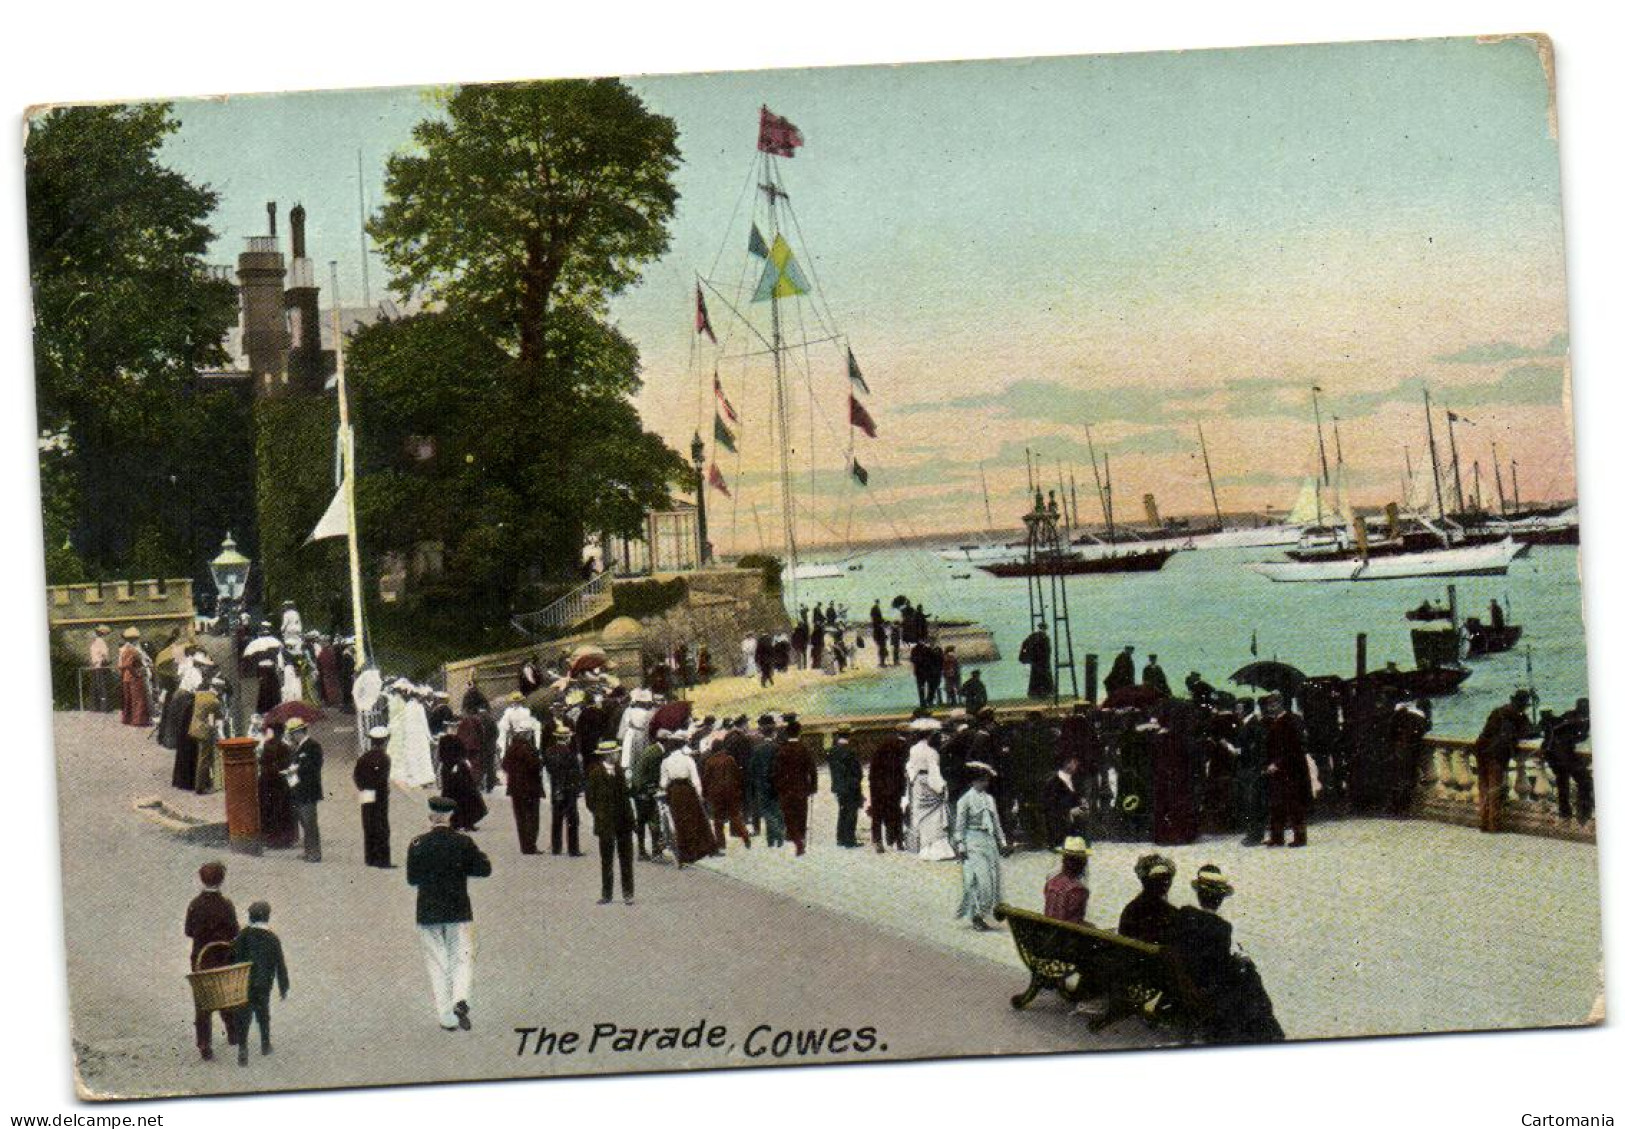 The Parade - Cowes - Cowes